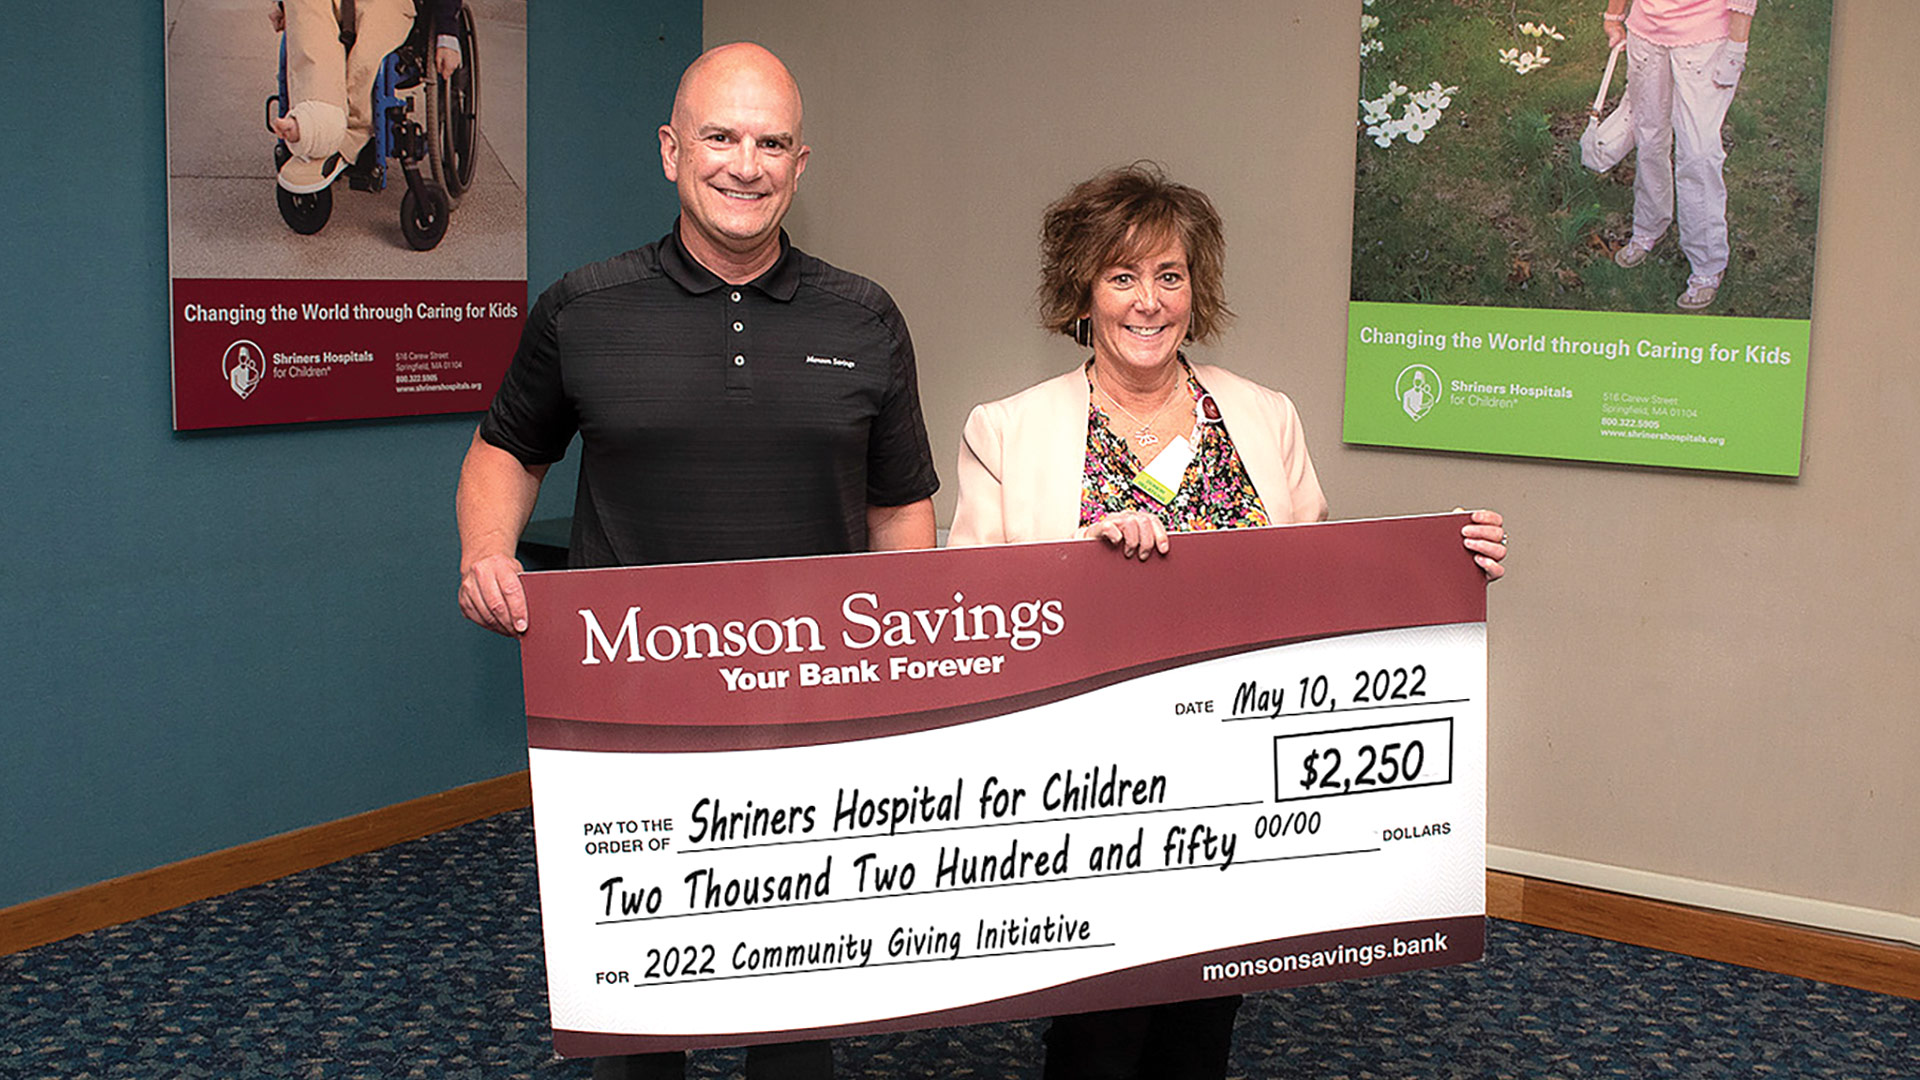 Moriarty visits Shriners Children’s Hospital in Springfield to present Stacey Perlmutter, the hospital’s director of Development, with a $2,250 donation, also part of the Community Giving Initiative